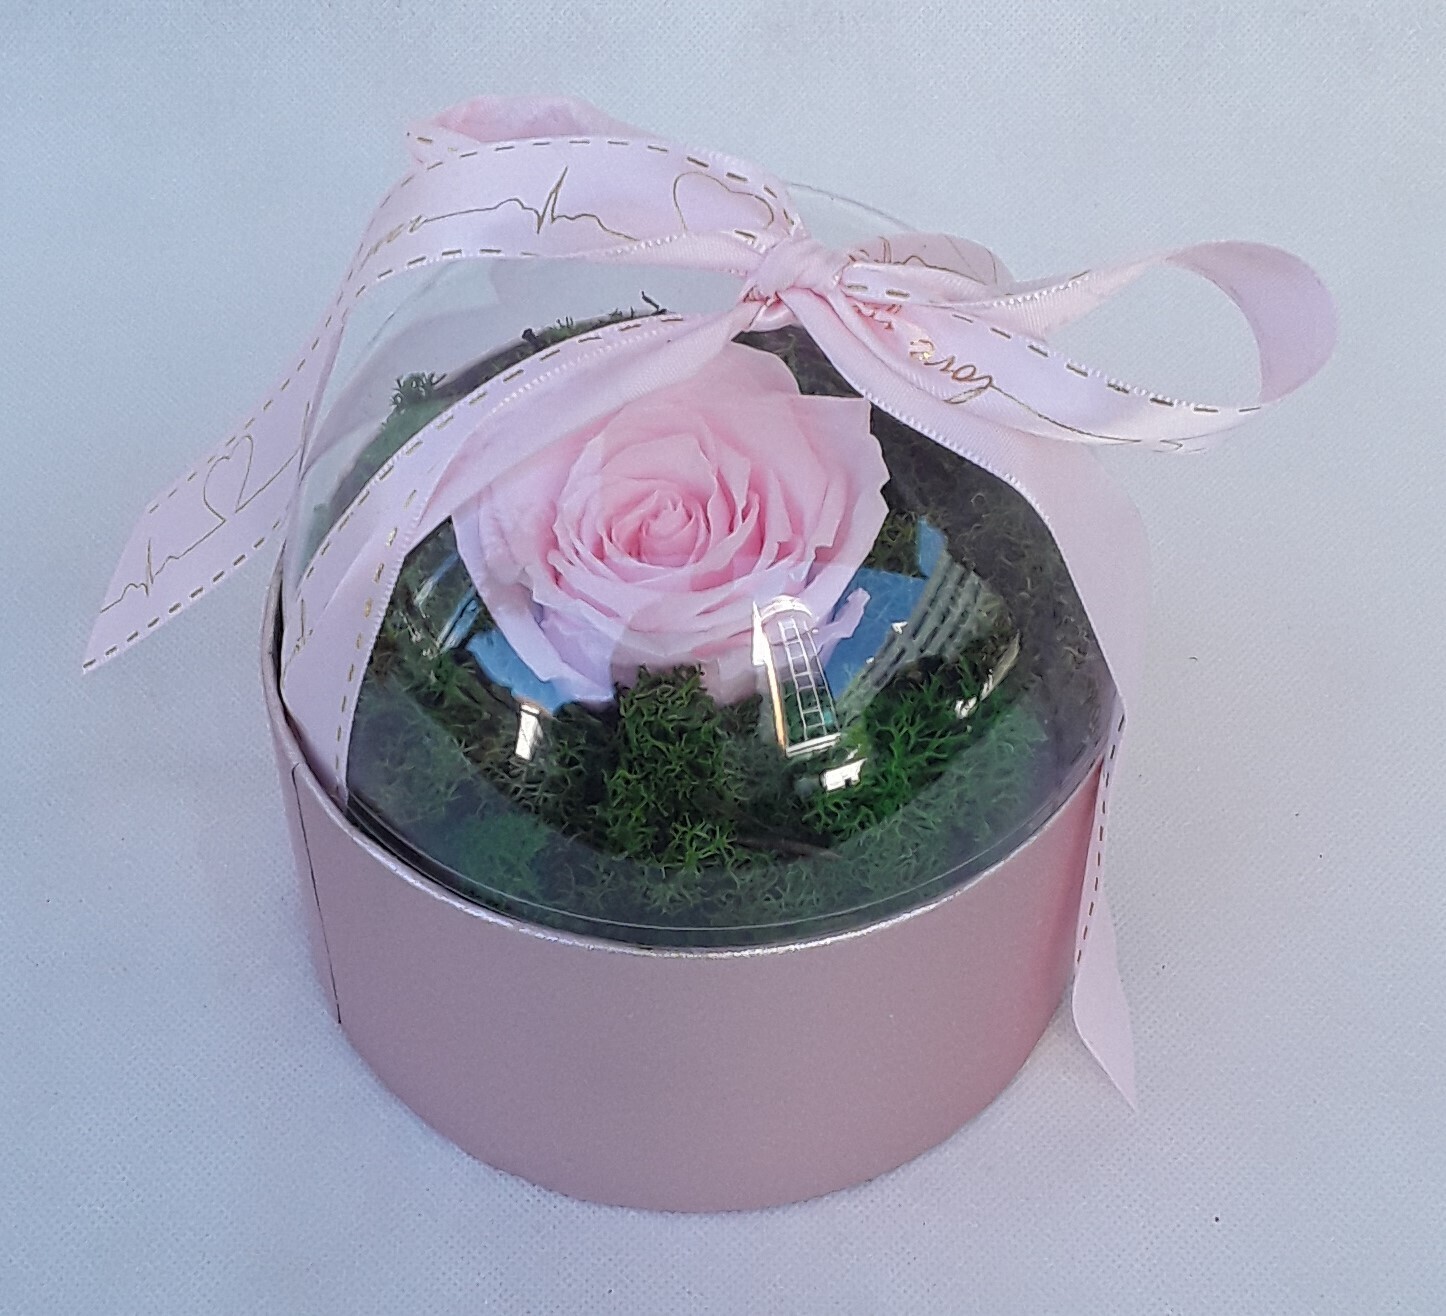 Forever pink rose in a box!!!